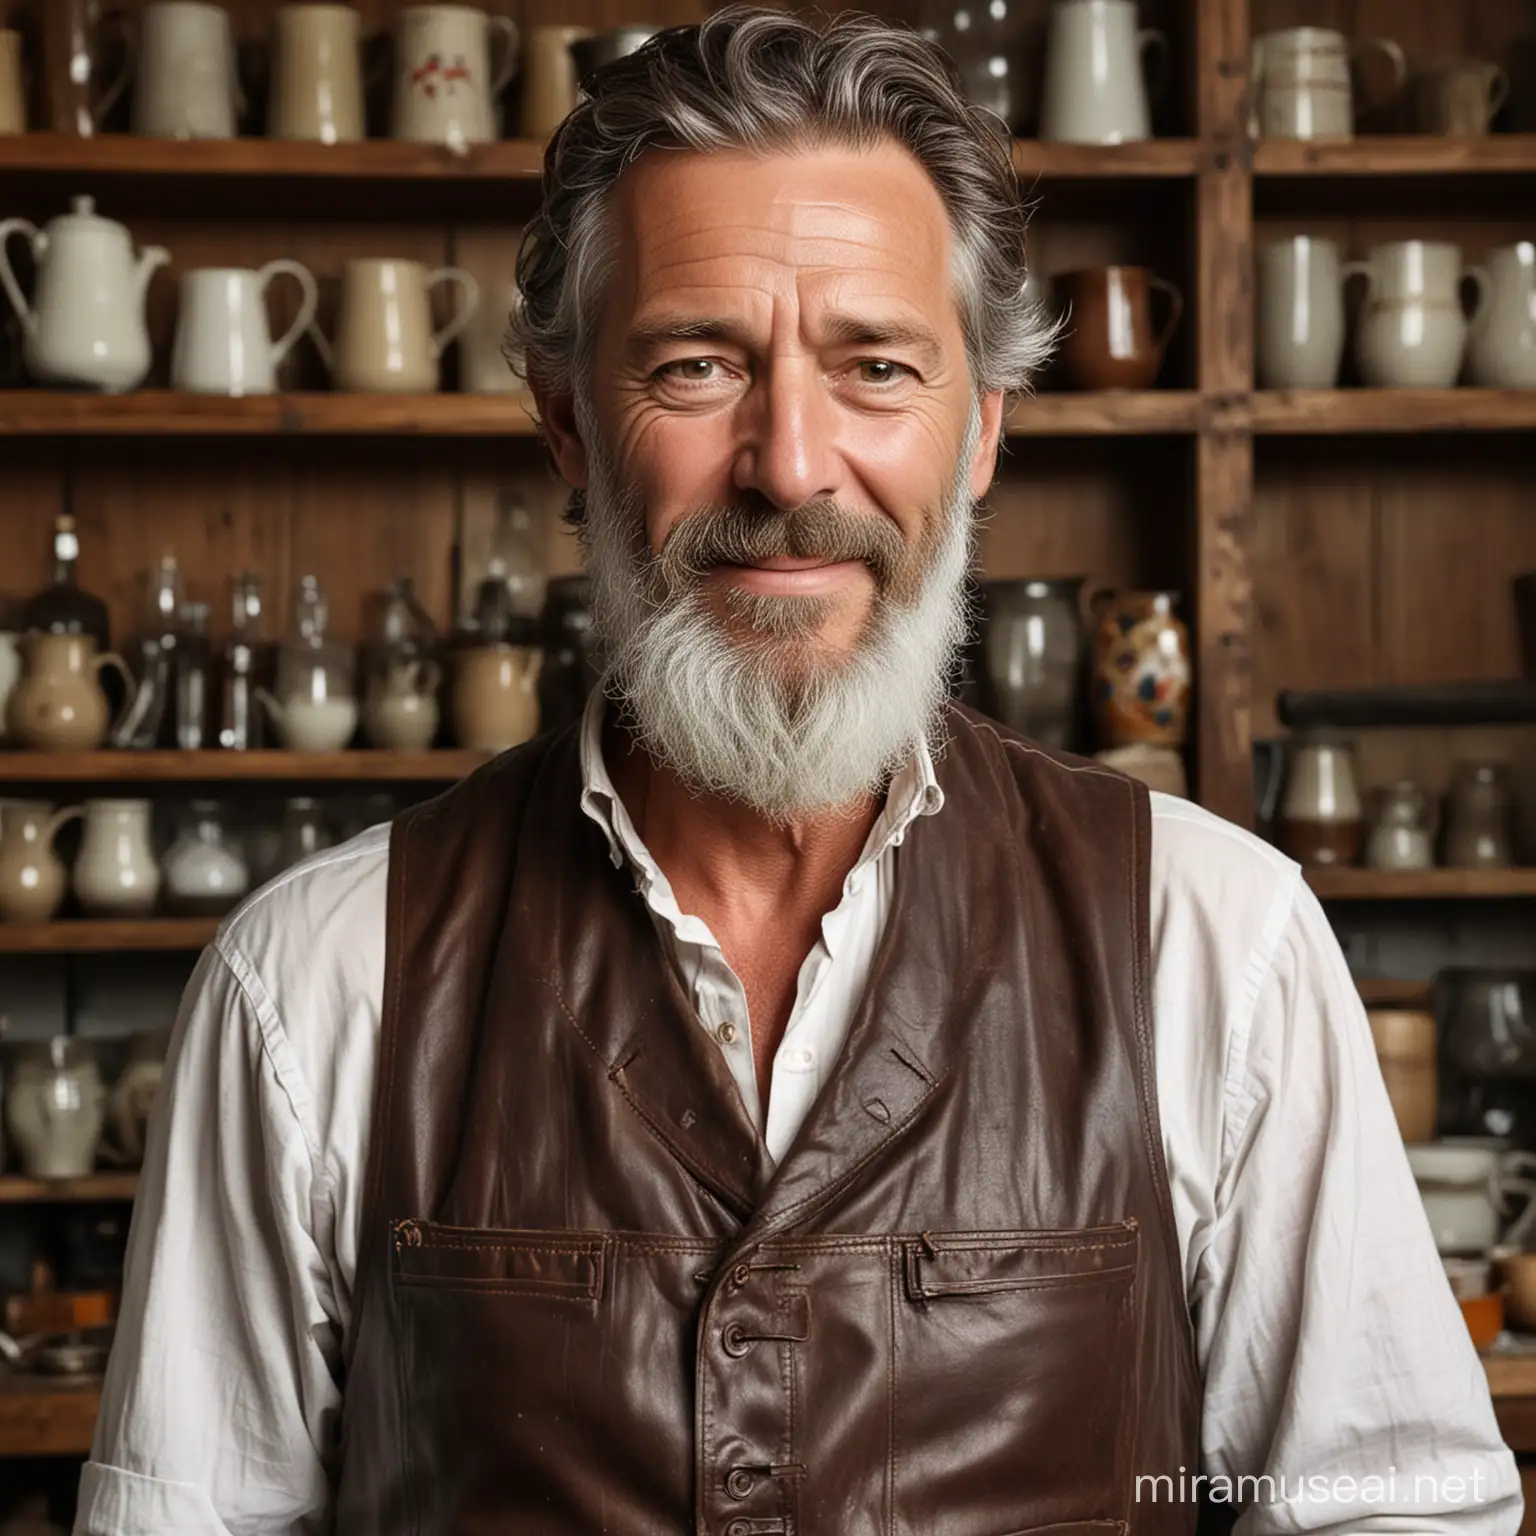 A man in his late 50s with a weathered face and kind eyes.
A thick, salt-and-pepper beard reaches his chest, and his hair is pulled back in a simple braid.
A network of wrinkles crinkle around his eyes and mouth, hinting at a life filled with laughter and hardship.
He wears a worn leather jerkin over a simple white shirt, the sleeves rolled up to reveal forearms thick with muscle.
A worn leather apron hangs low on his hips, tied at the waist.
Behind the counter, a shelf displays a variety of mugs and tankards.